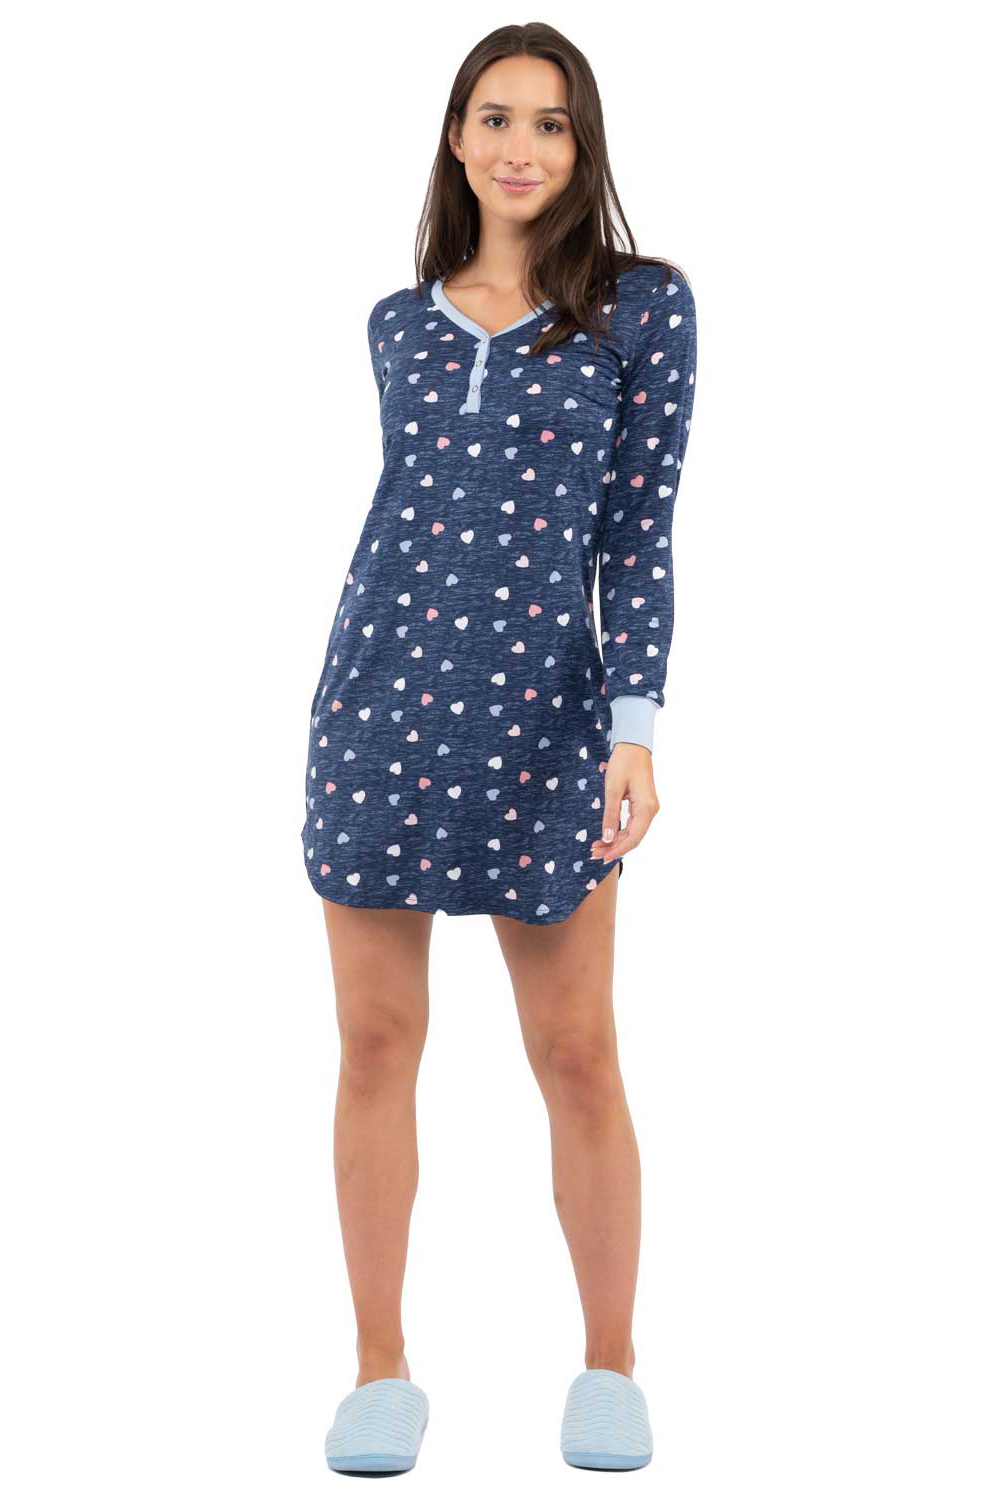 Blue Hearts long sleeve v-neck sleepshirt with snap button detail, extra large (XL)